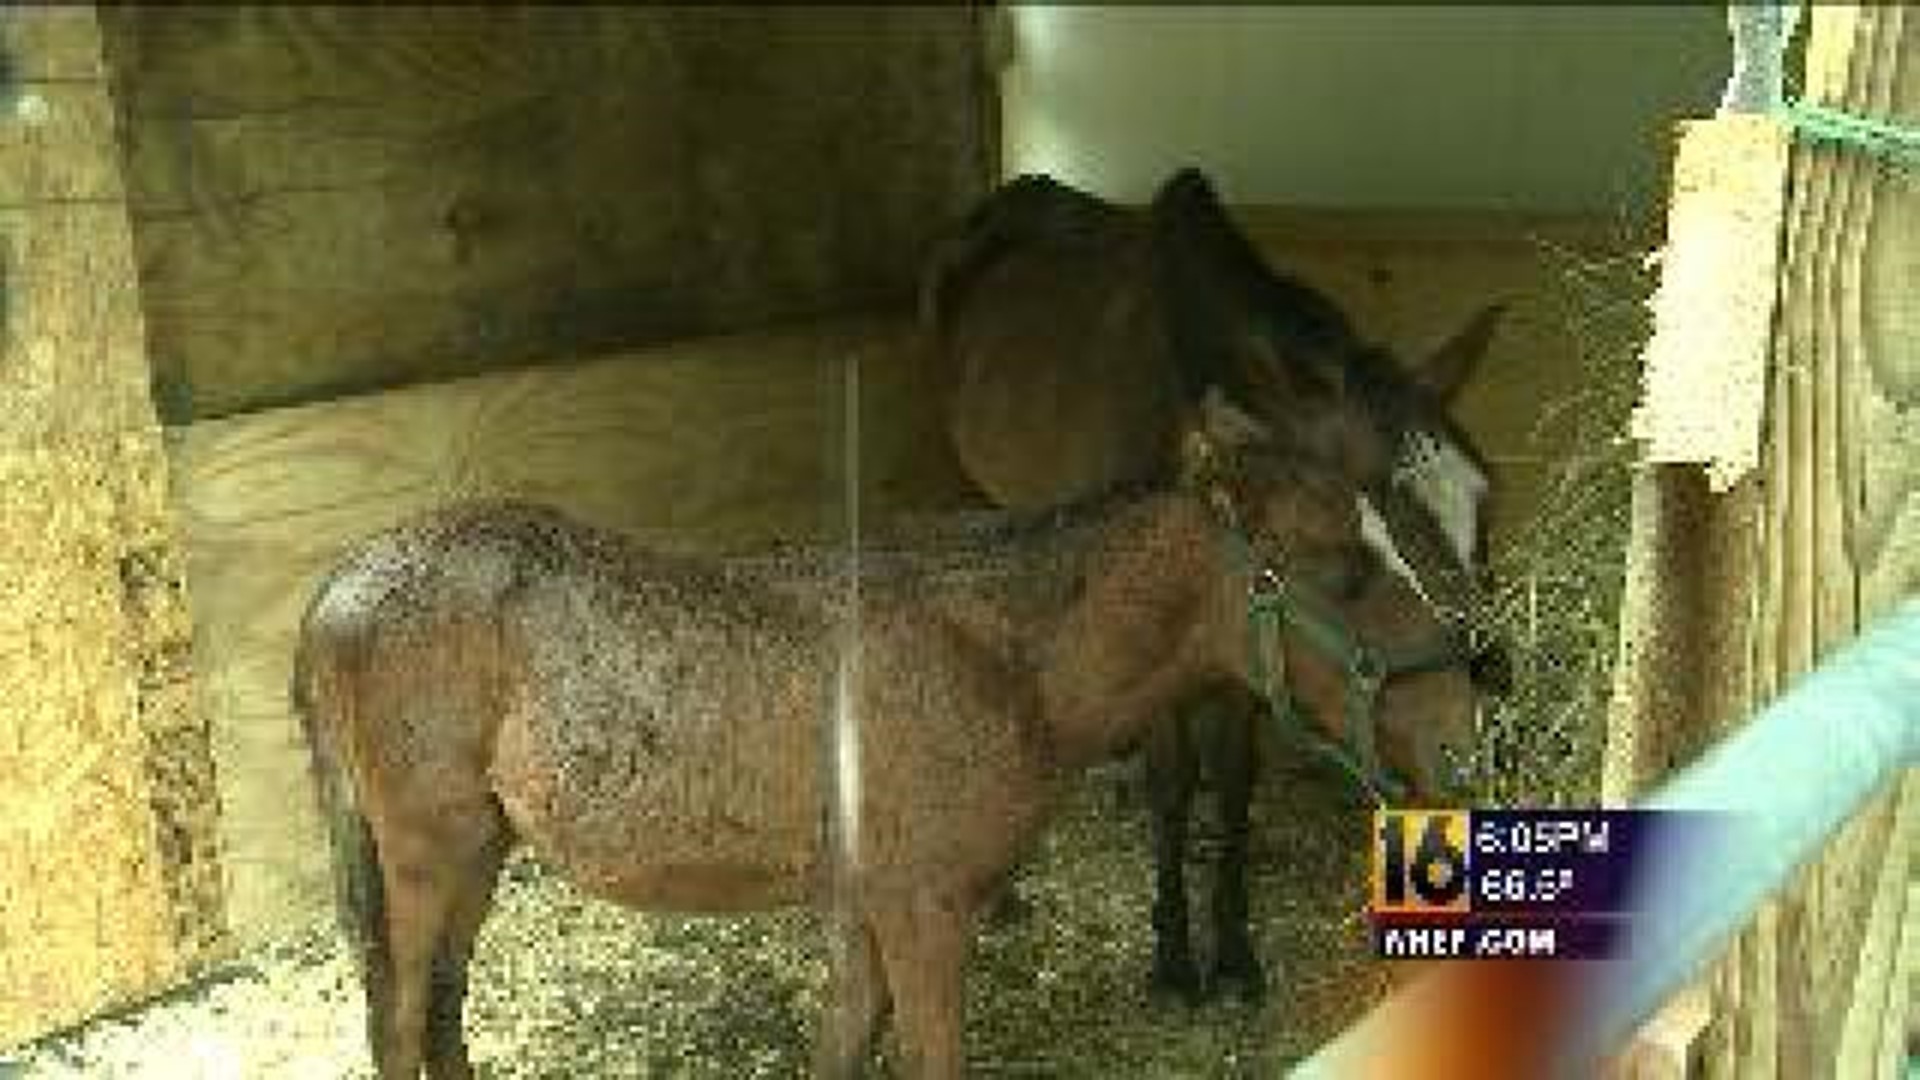 Malnourished Horses Now Getting Help